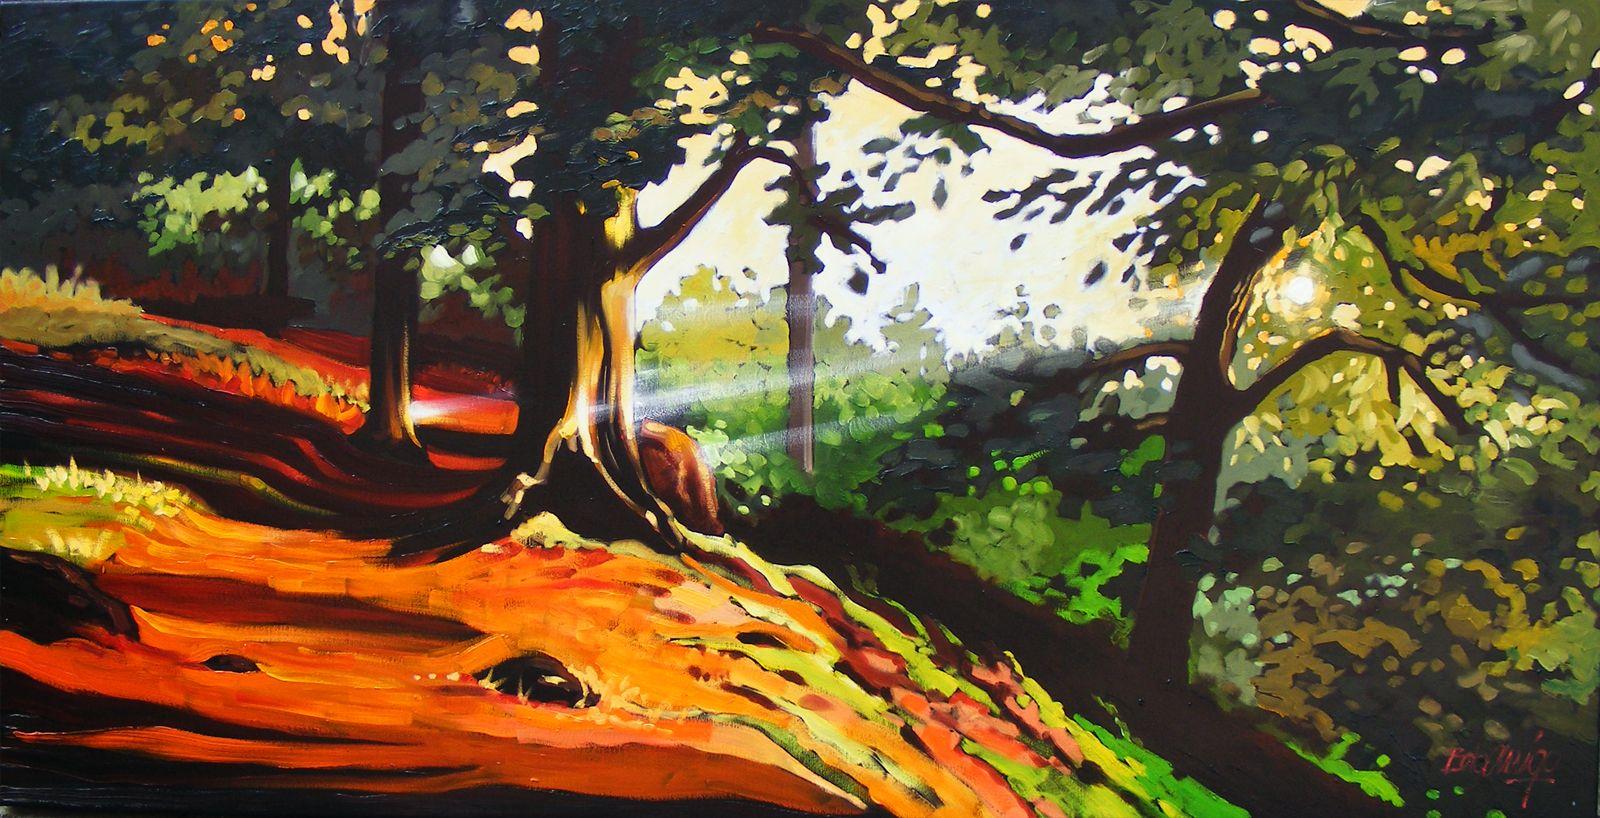 Breaking Light envisions the profound impact beauty of sunlight pouring through forest trees and blanketing the pathway of a cascading hillside. The painting is painted black around the sides to increase the drama of the scene. The canvas will be